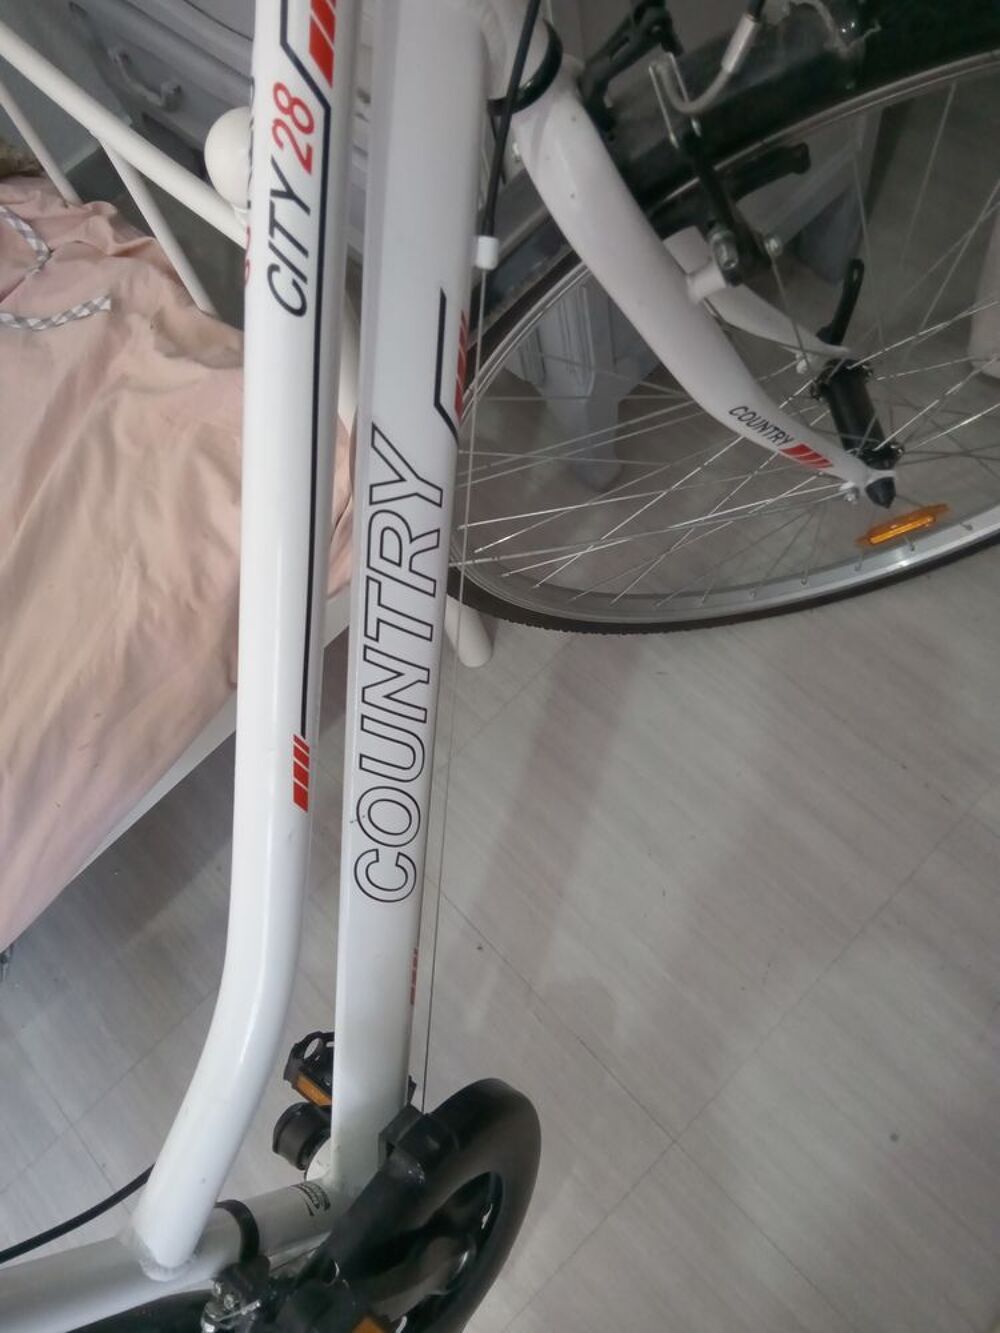 V&eacute;lo neuf grand taille Vlos